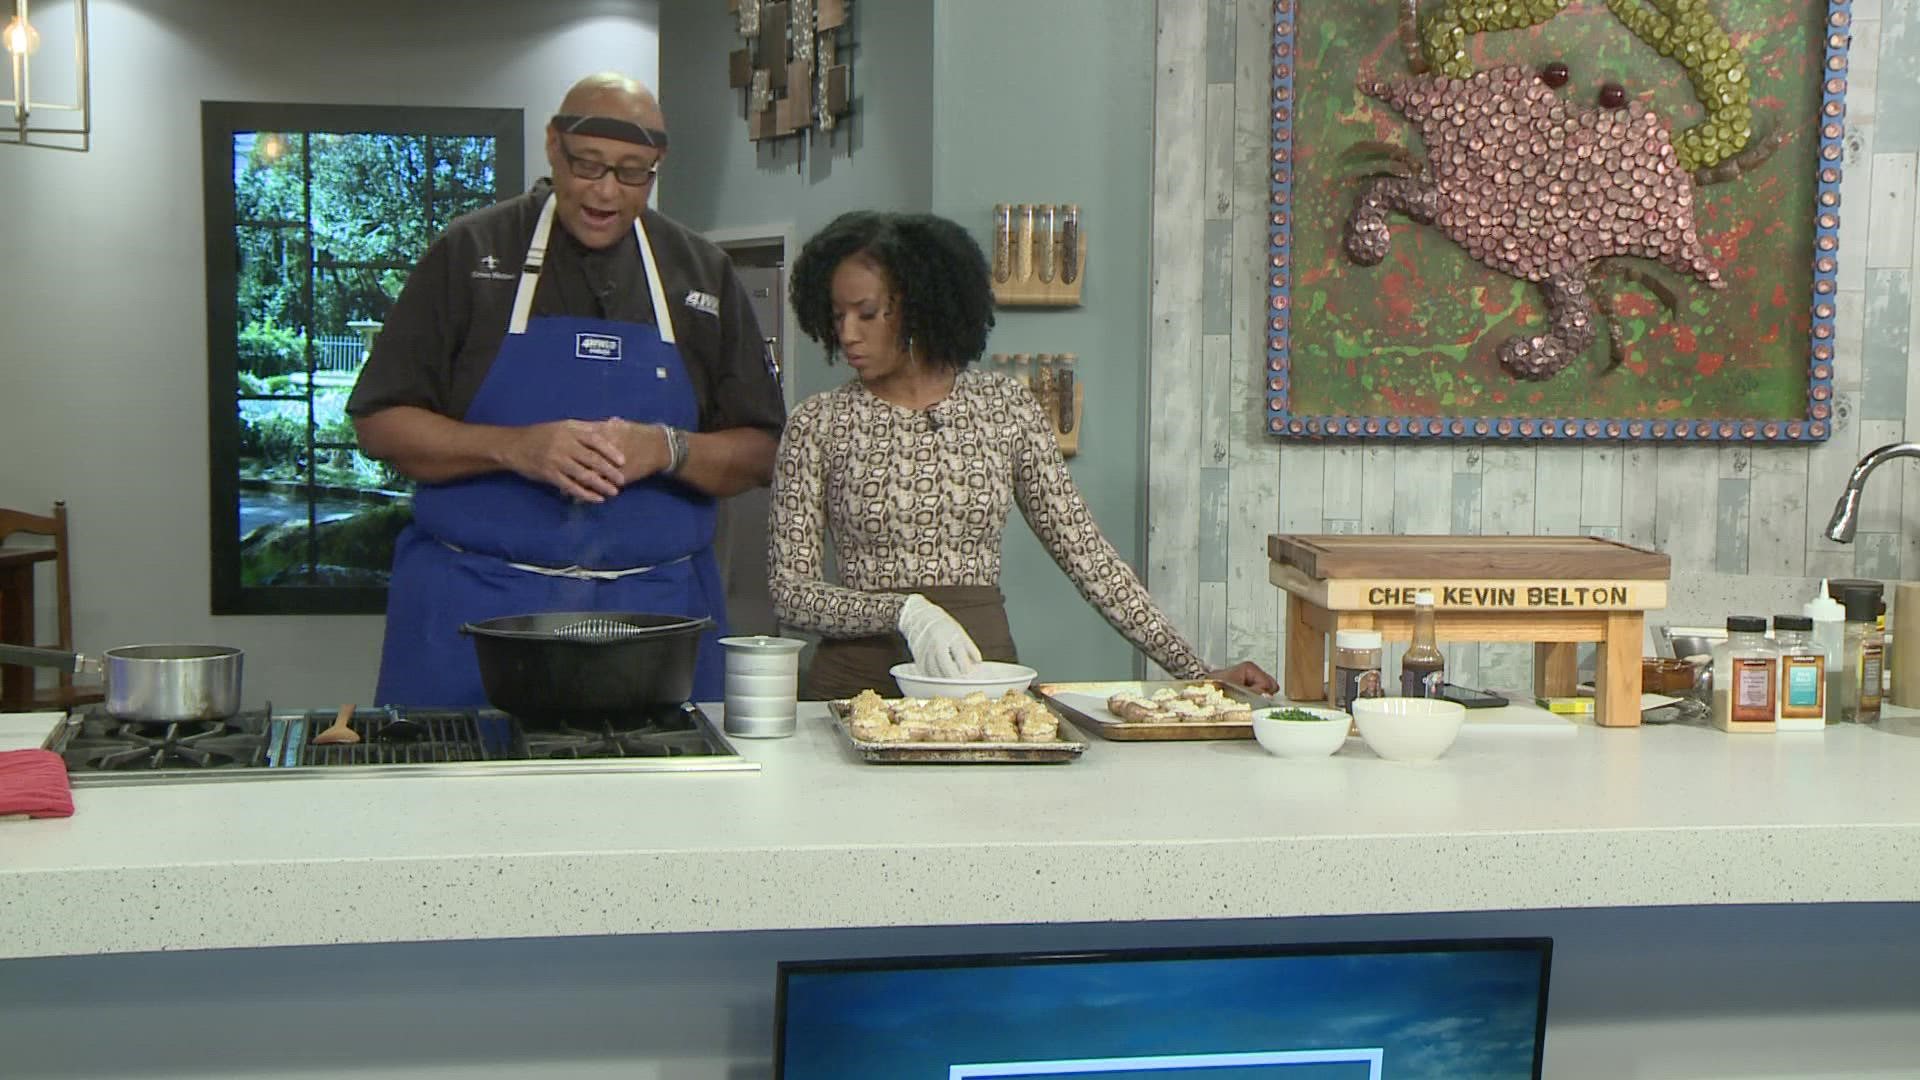 Chef Kevin is in the WWLTV kitchen cooking up Stuffed Mushrooms.